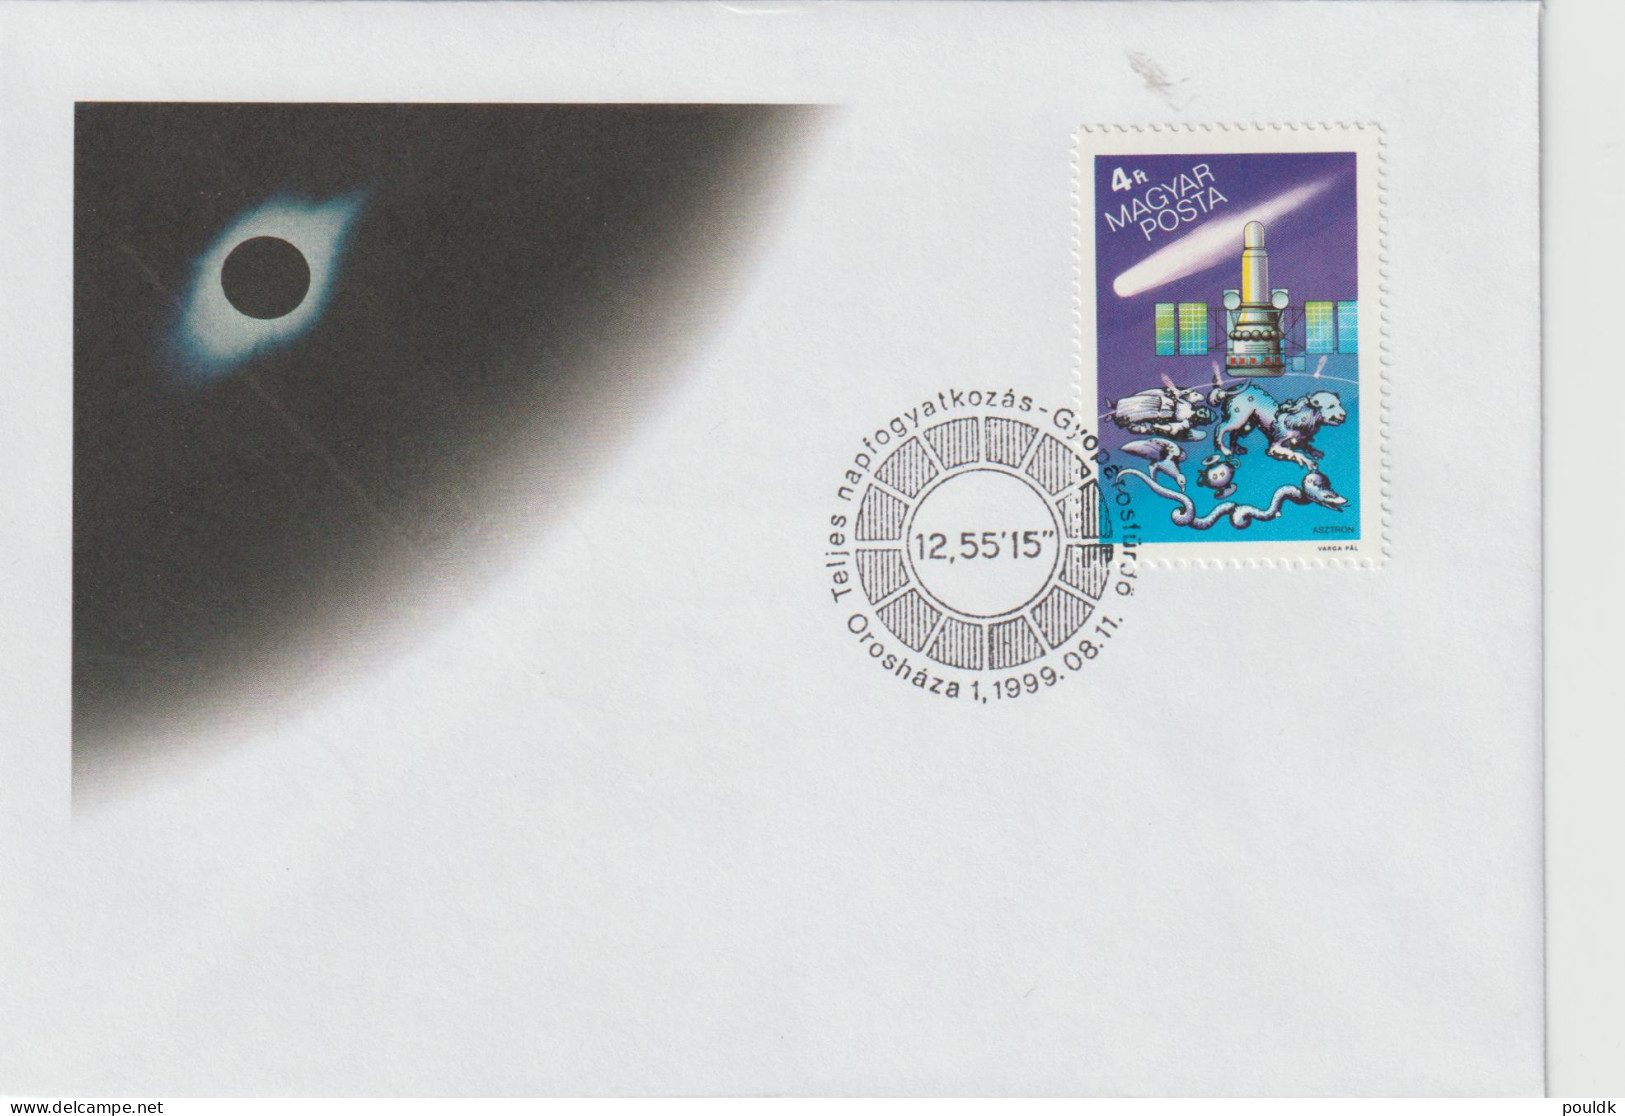 Solar Eclipse 1999 - Commemorative Cover From Hungary 11.8.1999. Postal Weight 0,04 Kg. Please Read Sales Conditions - Nature